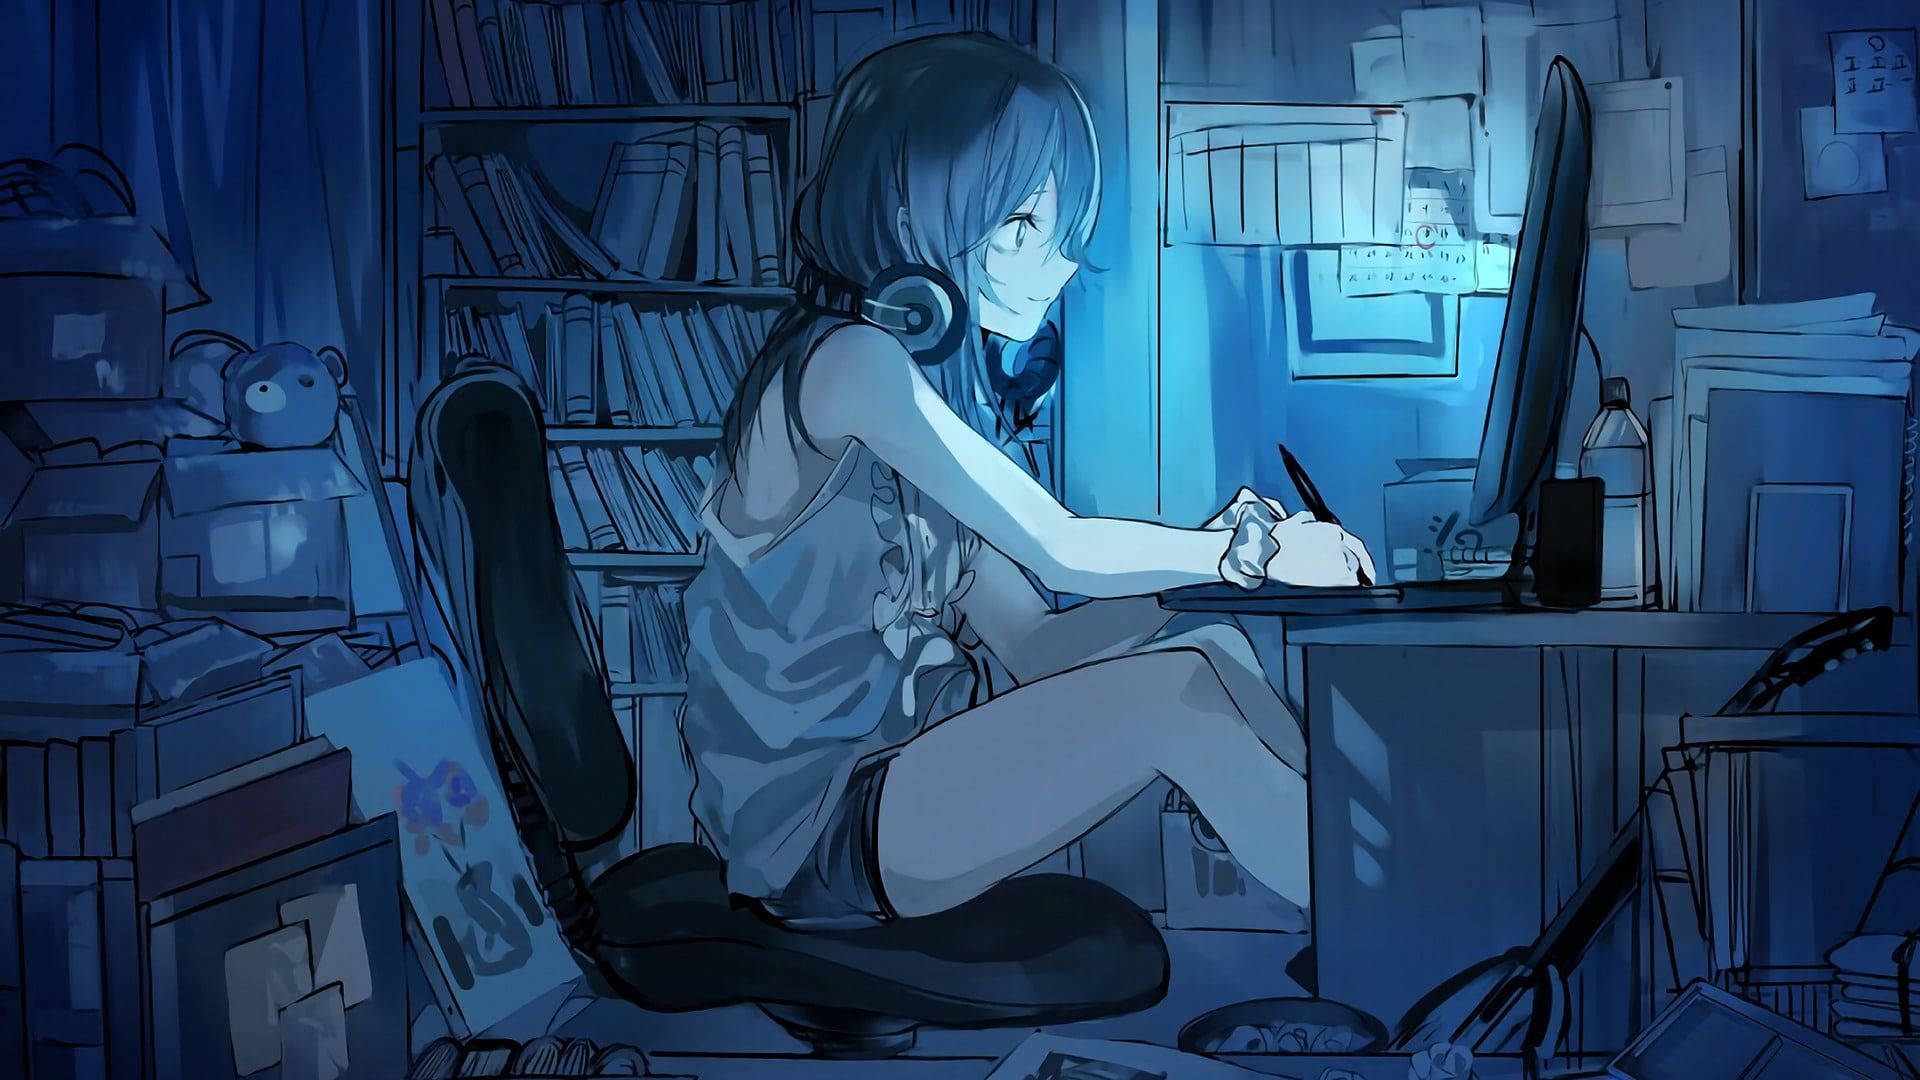 Anime Girl Working With Her Laptop In A Dim Room Wallpaper